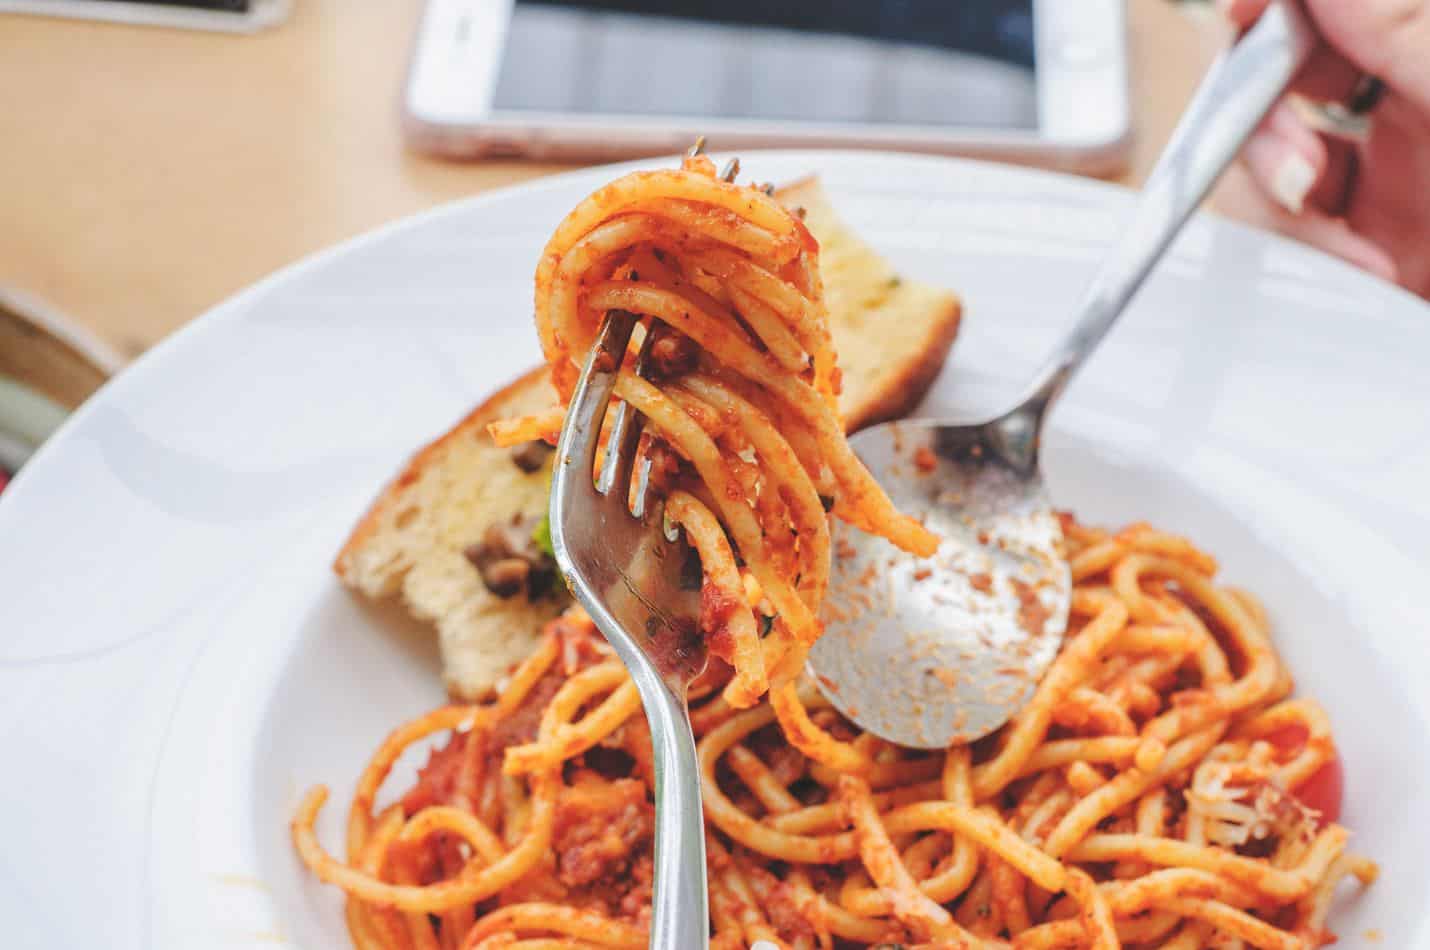 Marathon runners love to carbo load.